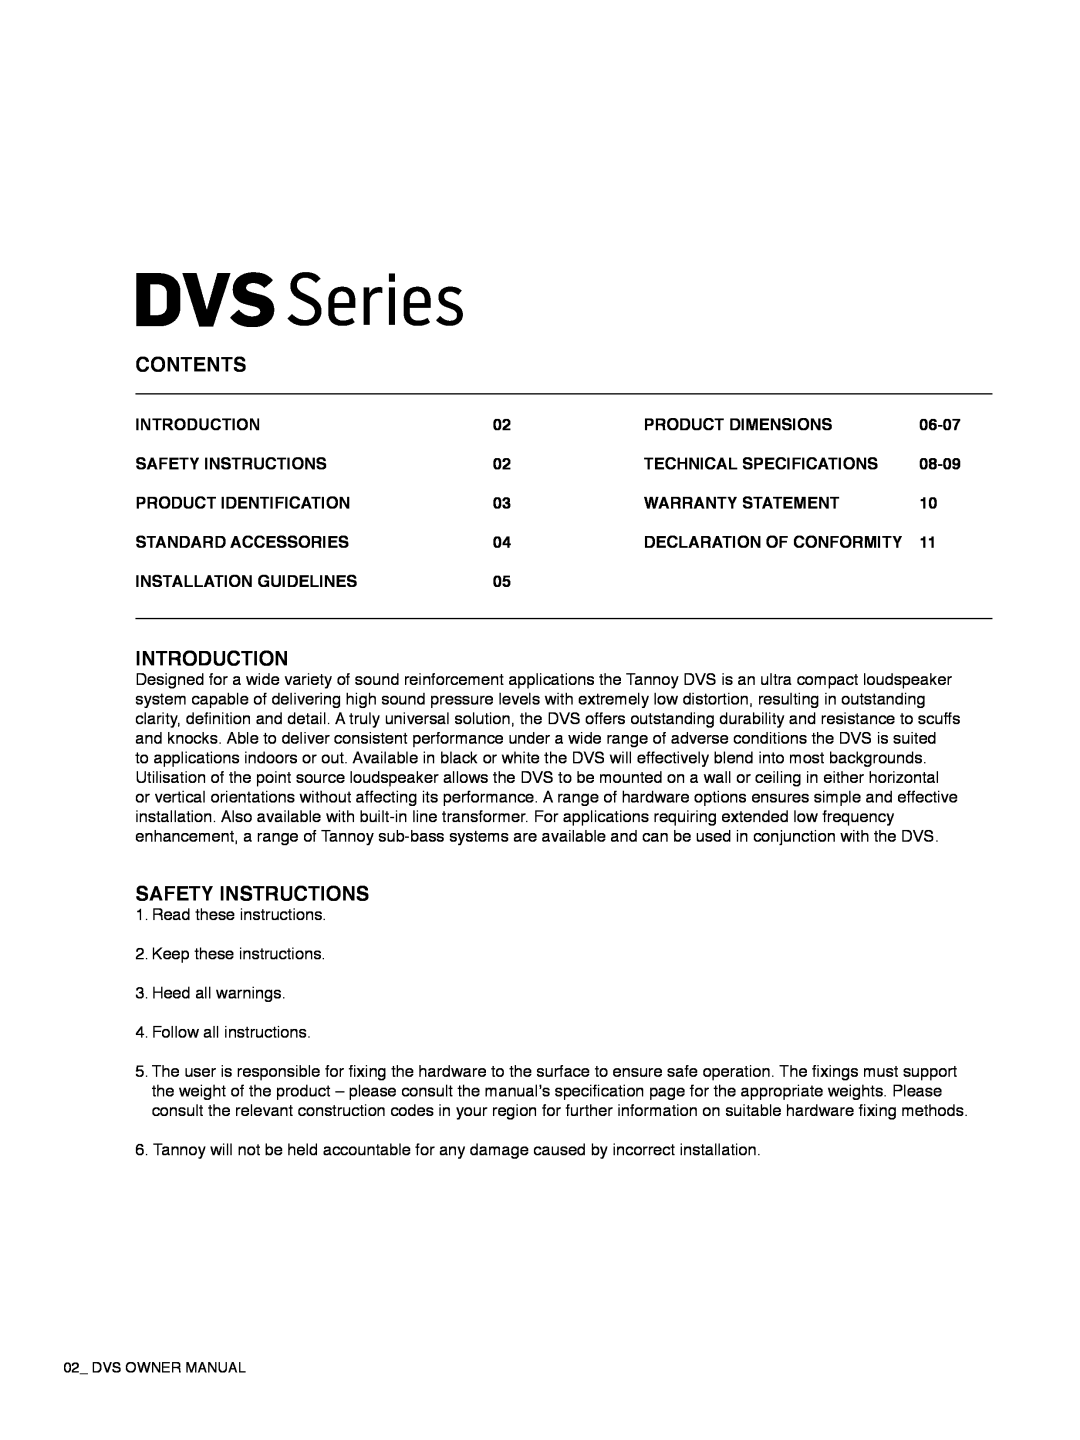 Tannoy DVS Series owner manual contents, Introduction, Safety Instructions, Product Dimensions, tecHNICAL SPECIFICATIONS 